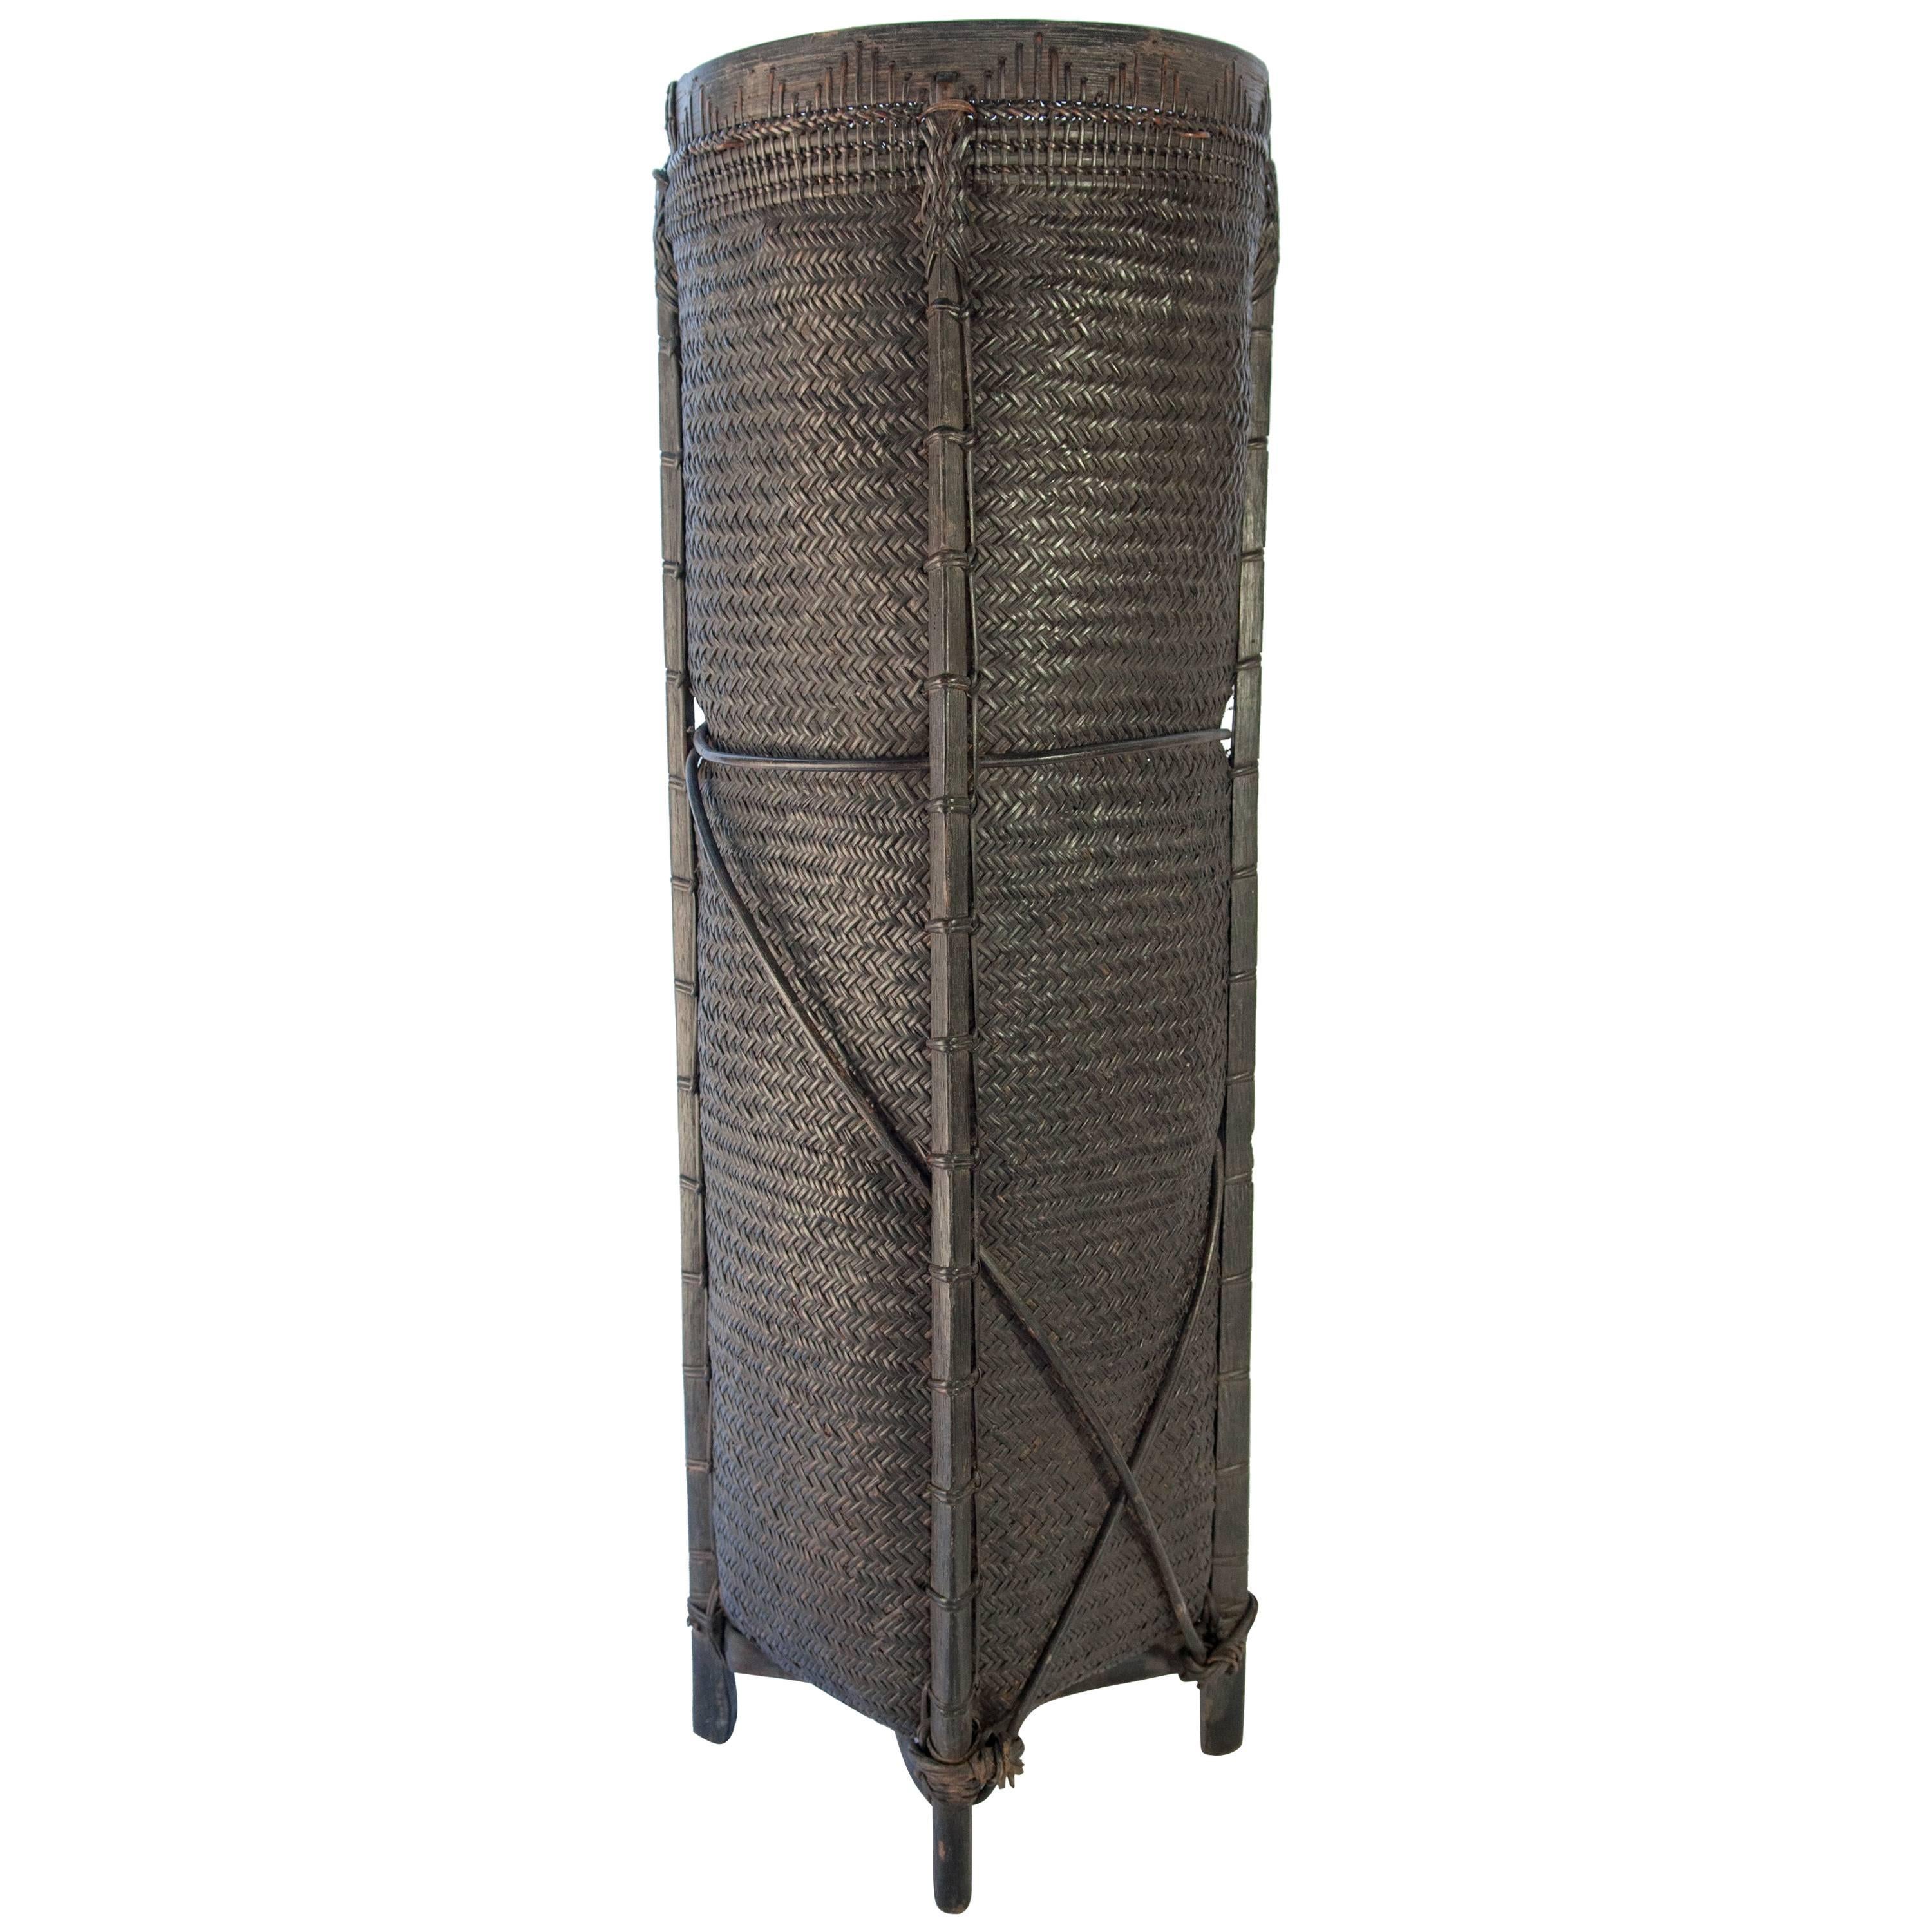 Tall Tribal Grain Storage Basket from Borneo, Mid-Late 20th Century